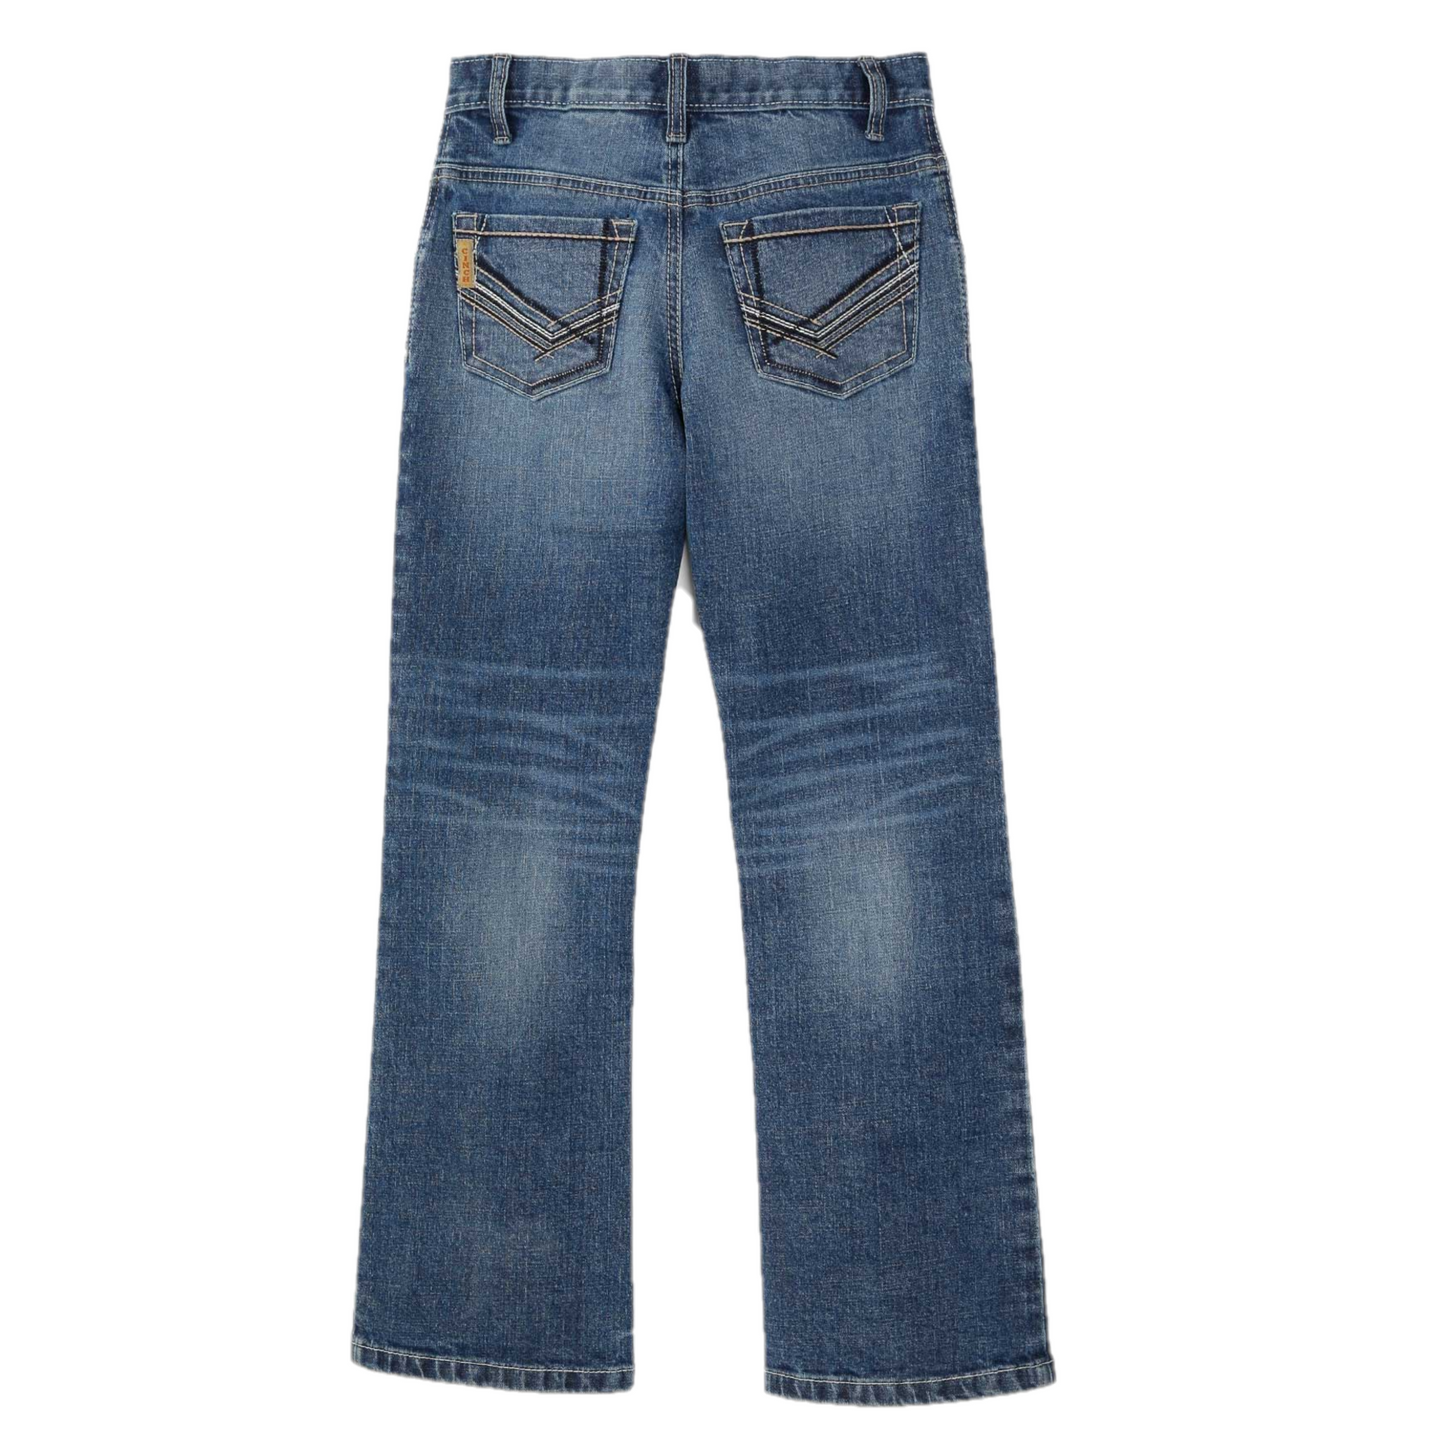 Cinch Little Boy's Relaxed Fit Medium Stonewash Jeans MB16642007